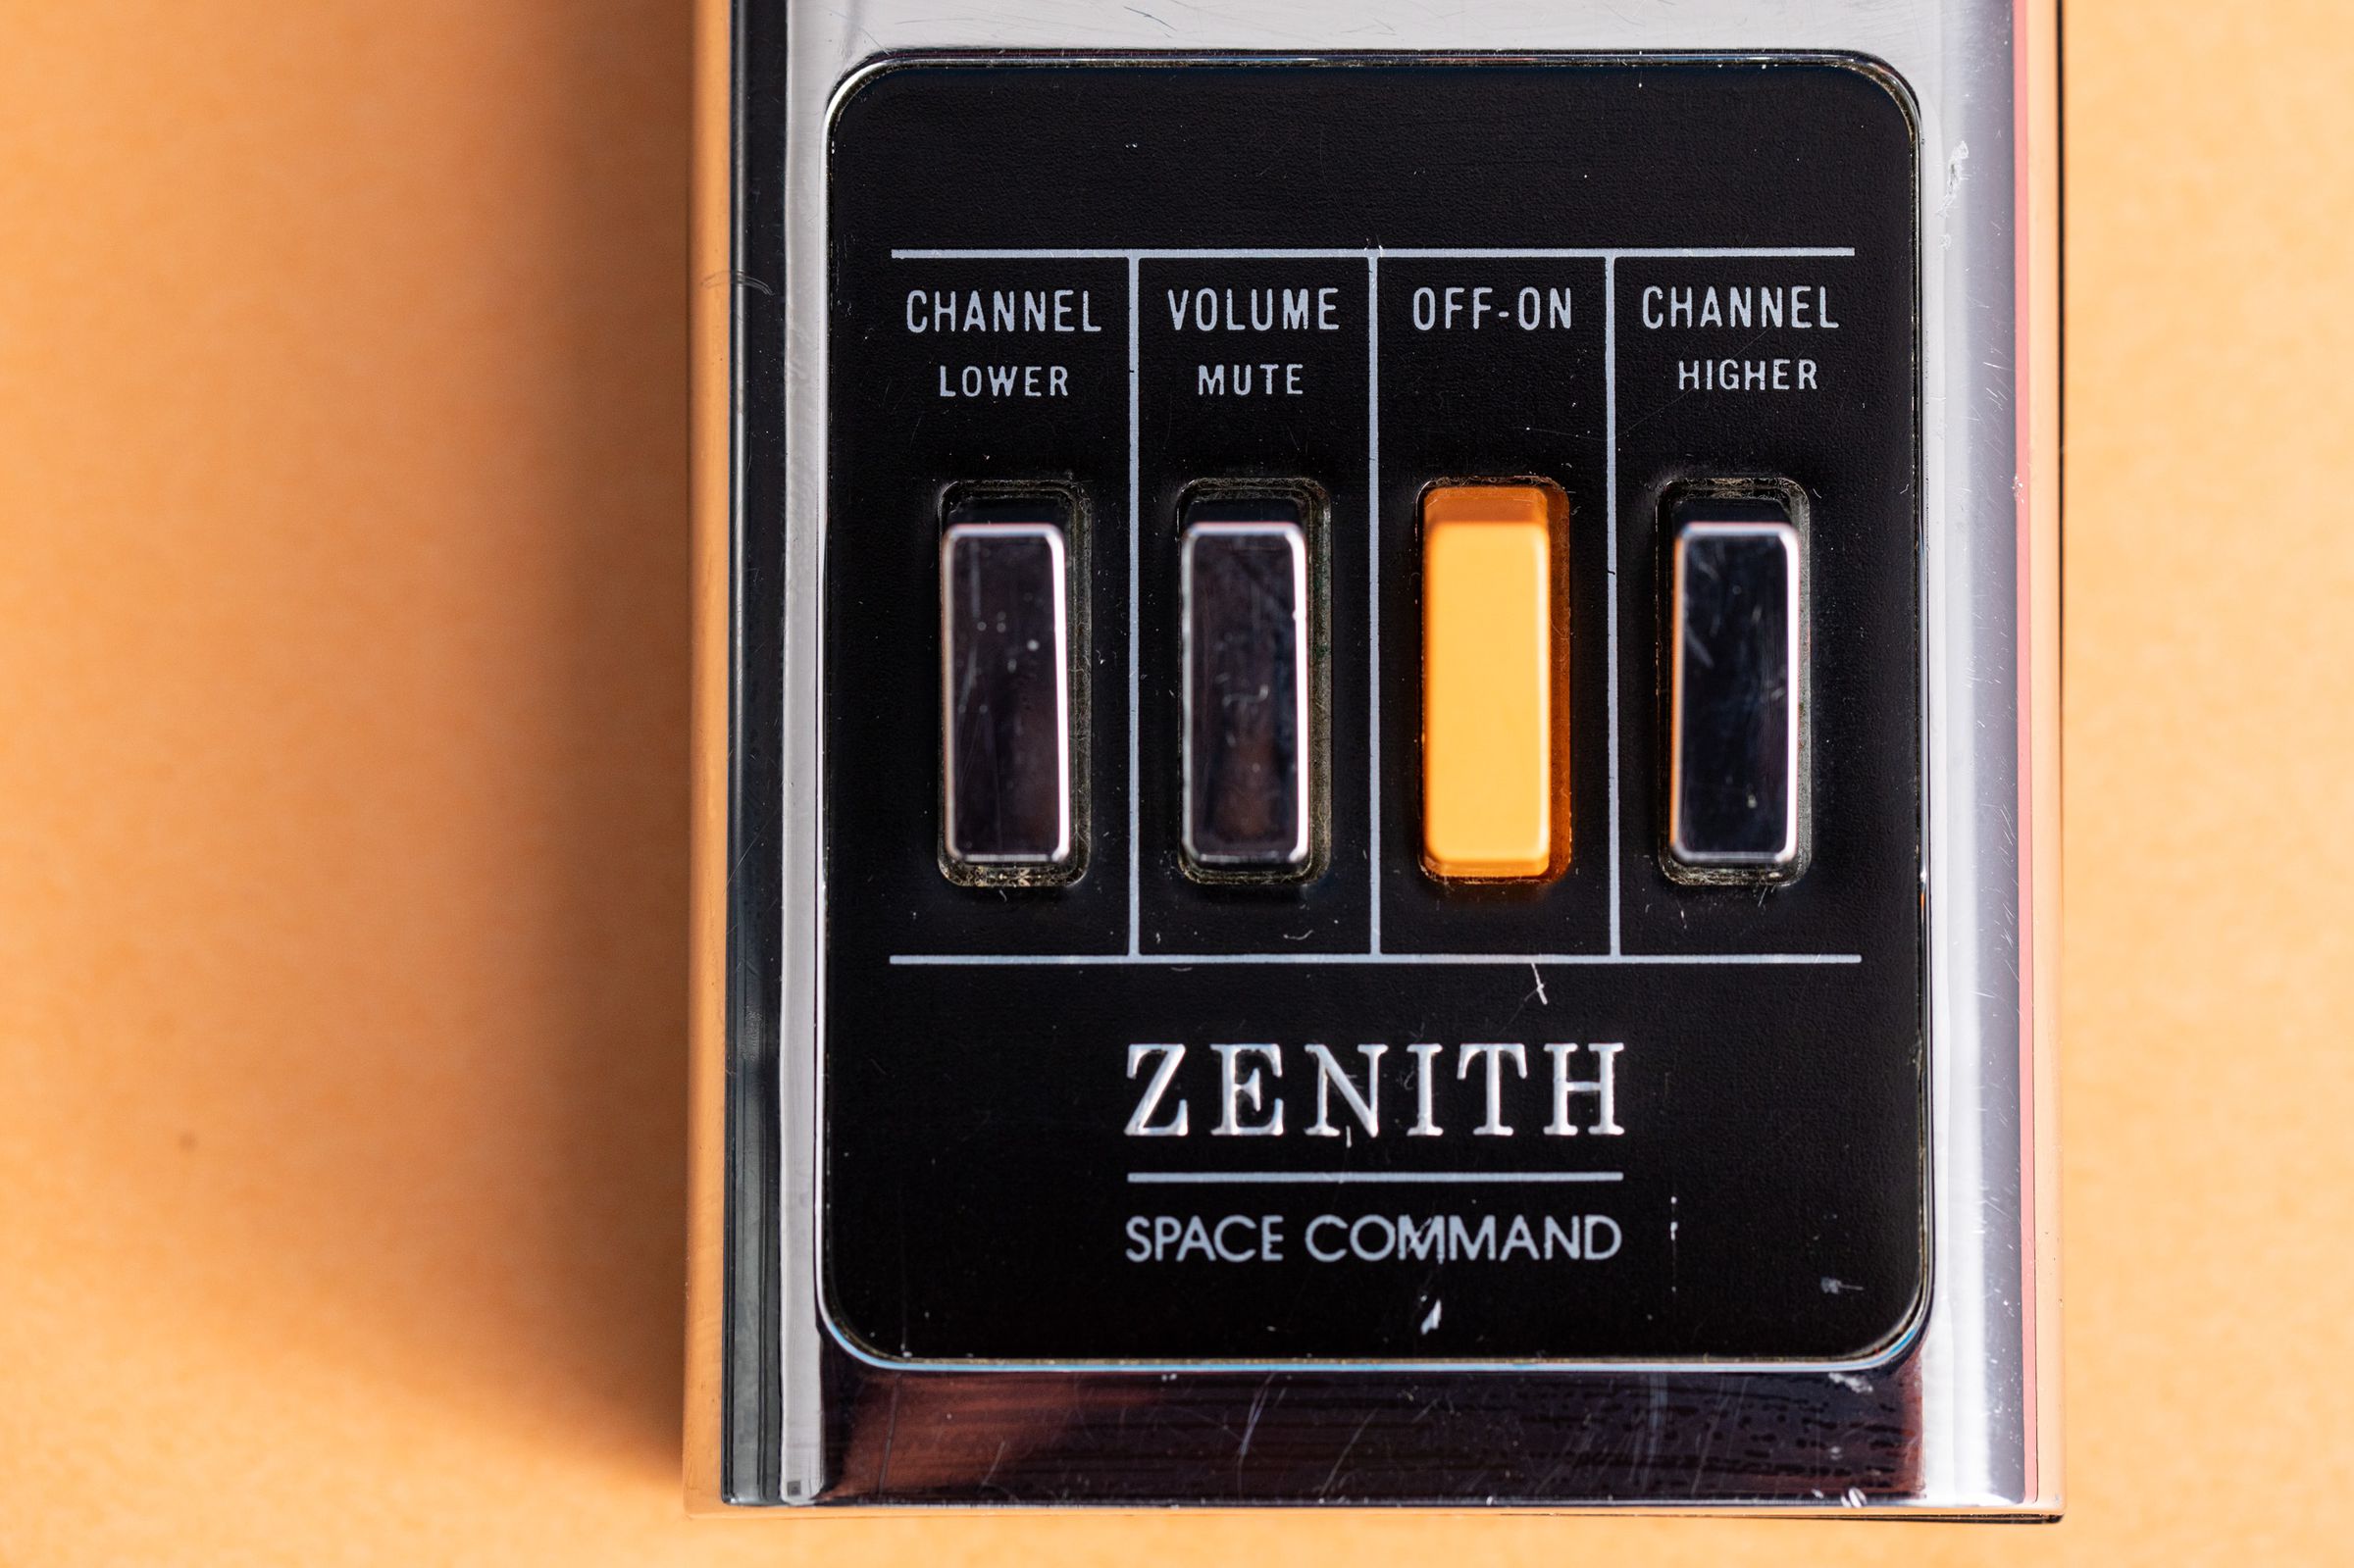 Front face of Zenith Space Command with Zenith logo and four buttons. Channel Lower, Volume Mute, OFF-ON, Channel Higher. 